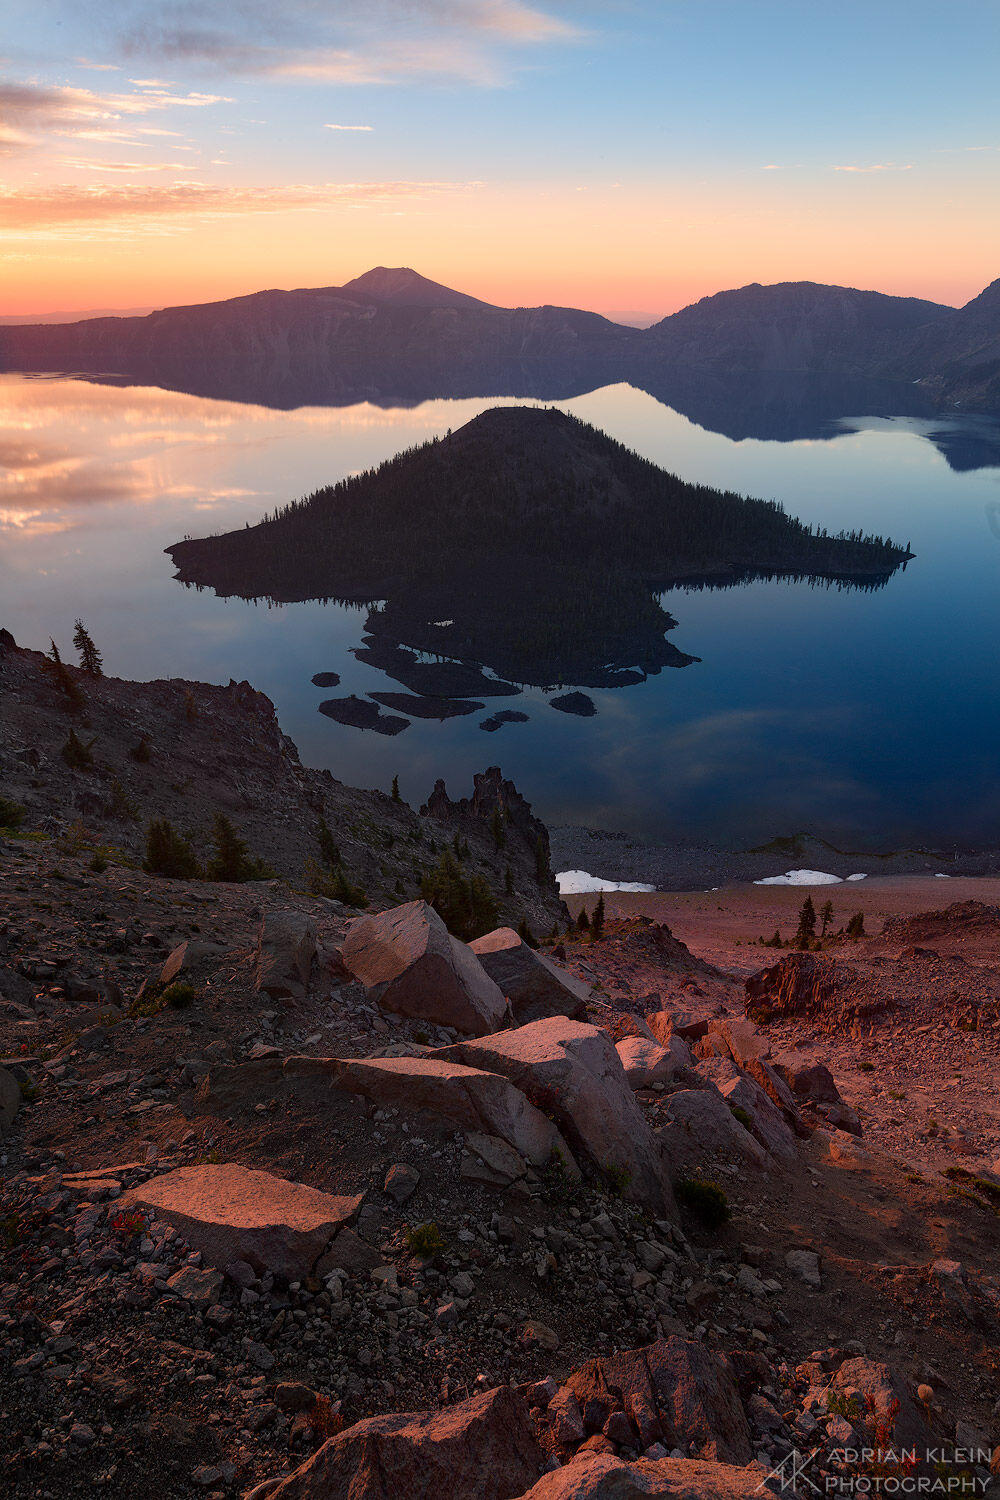 Sunrise along the rim of Crater Lake in Summer time at Crater Lake National Park, Oregon. Limited Edition of 50.